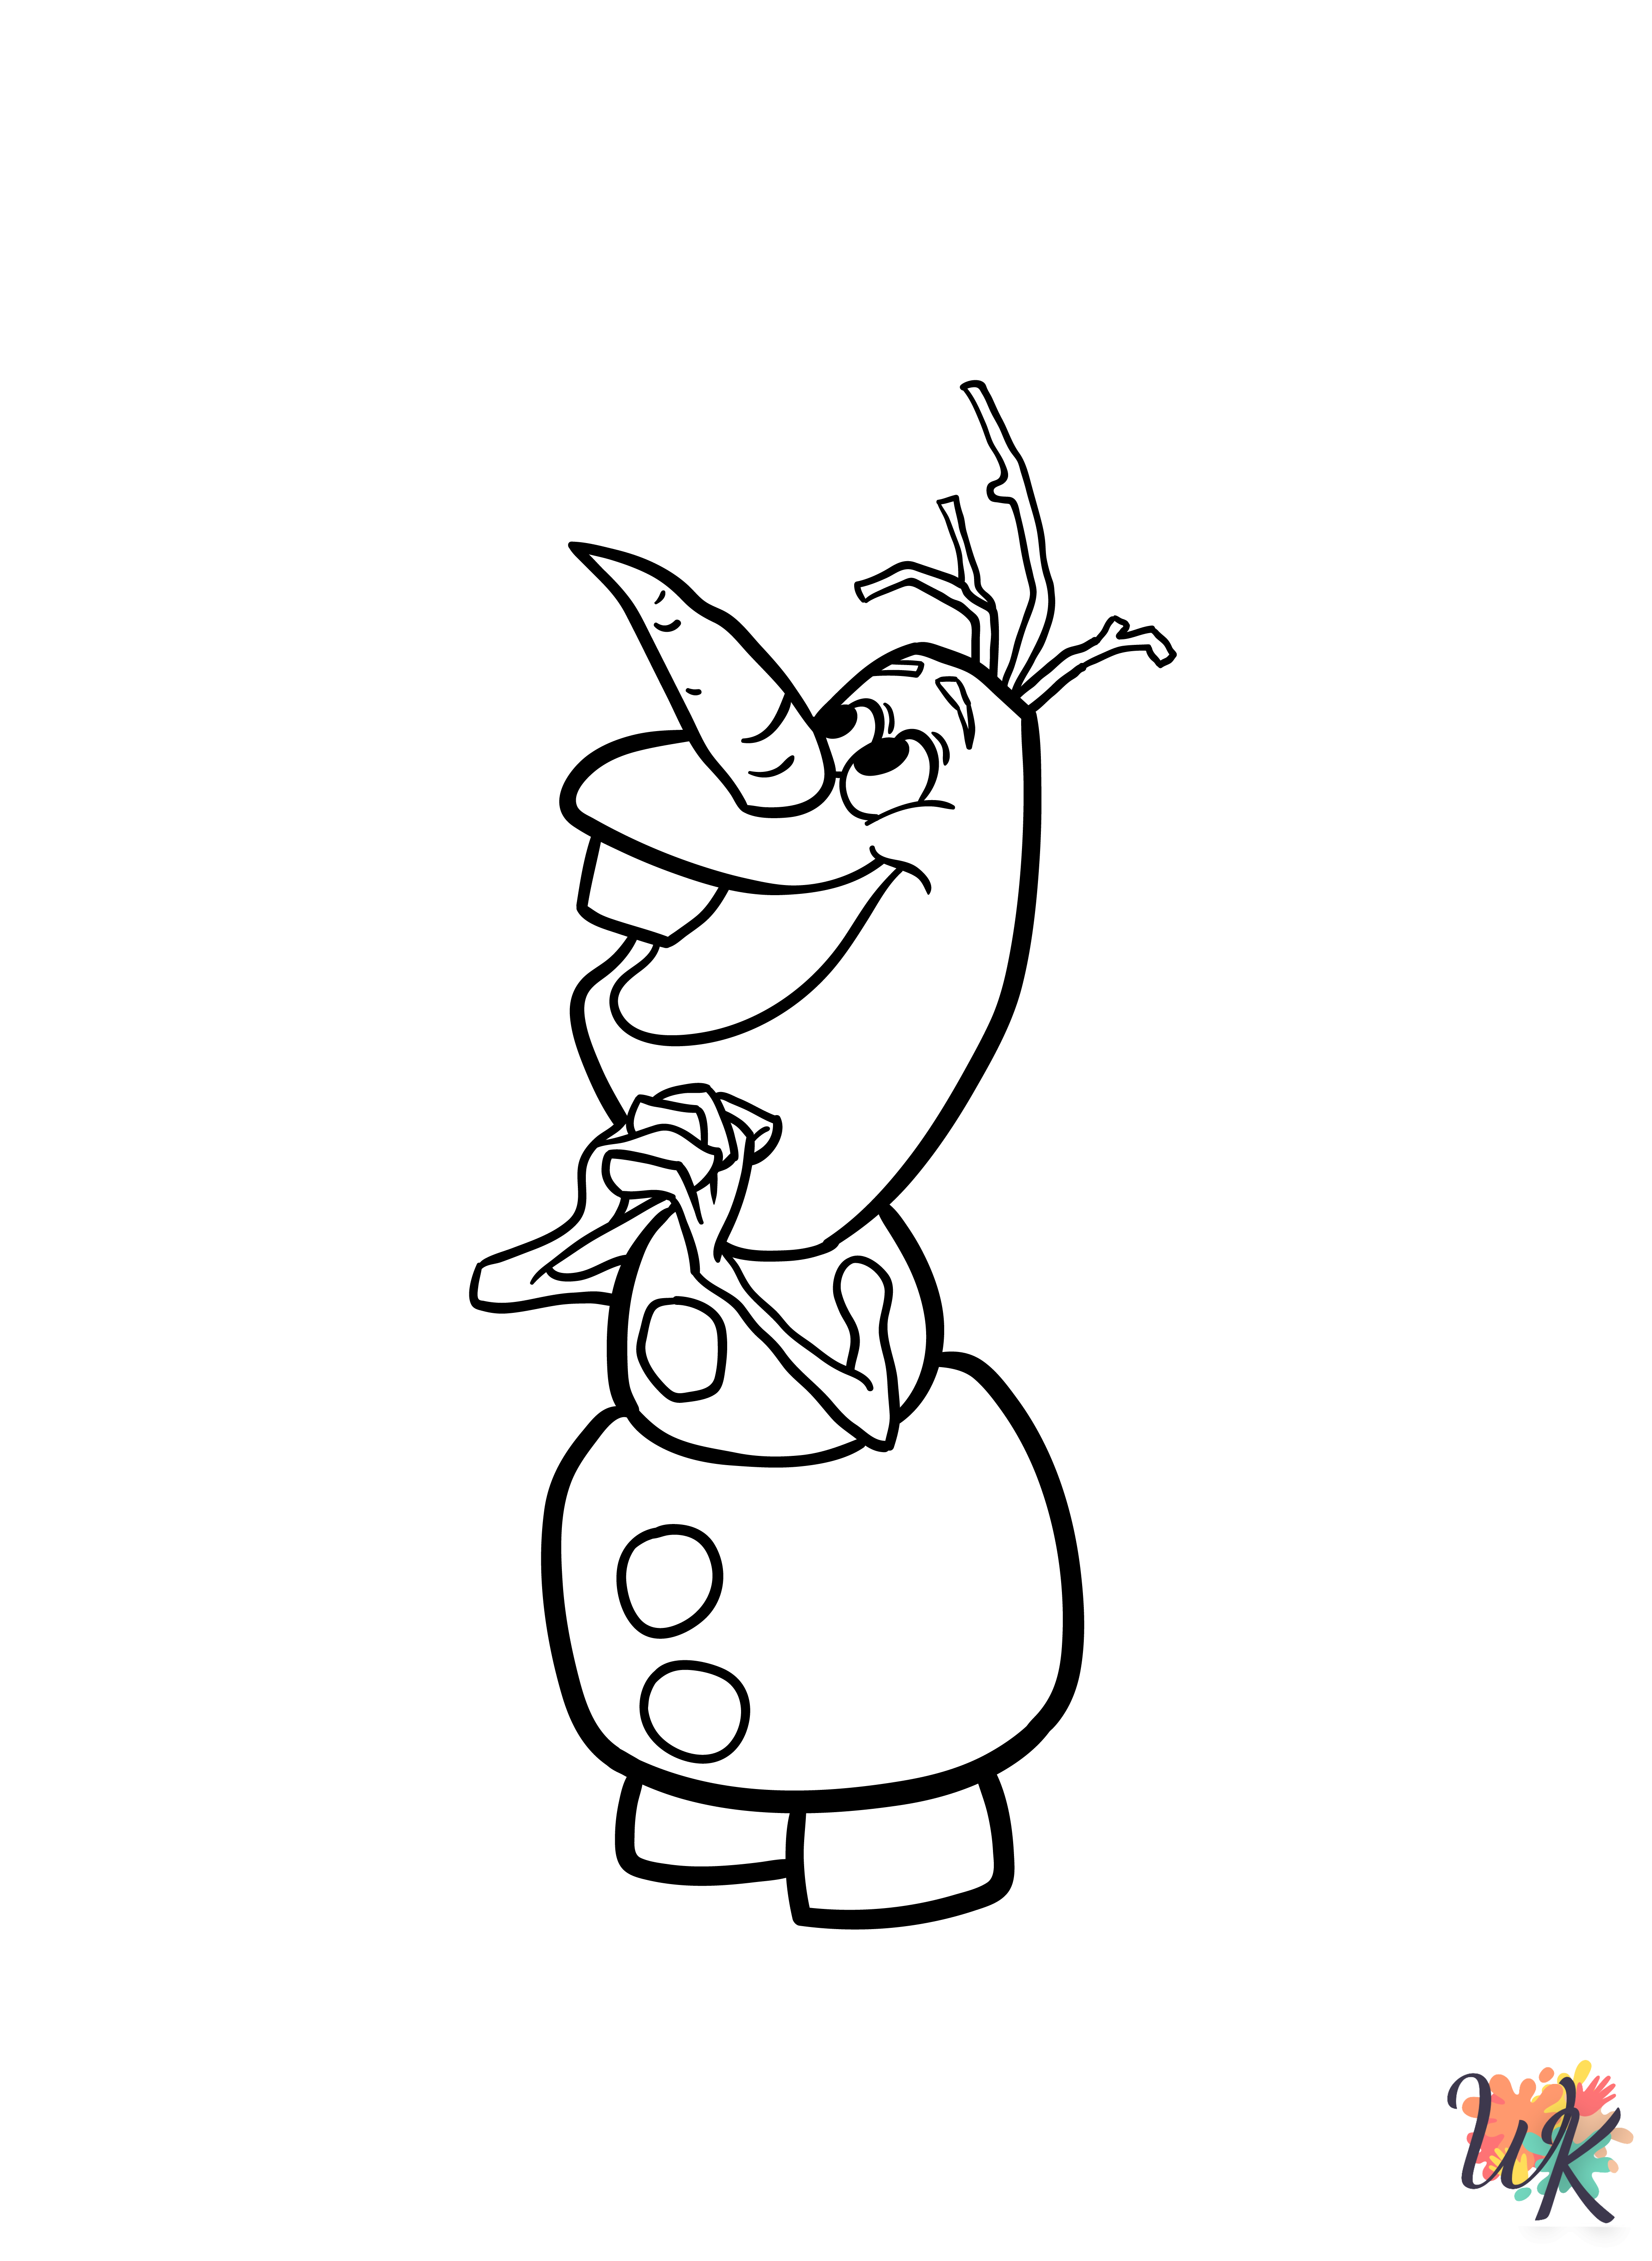 Olaf free coloring pages